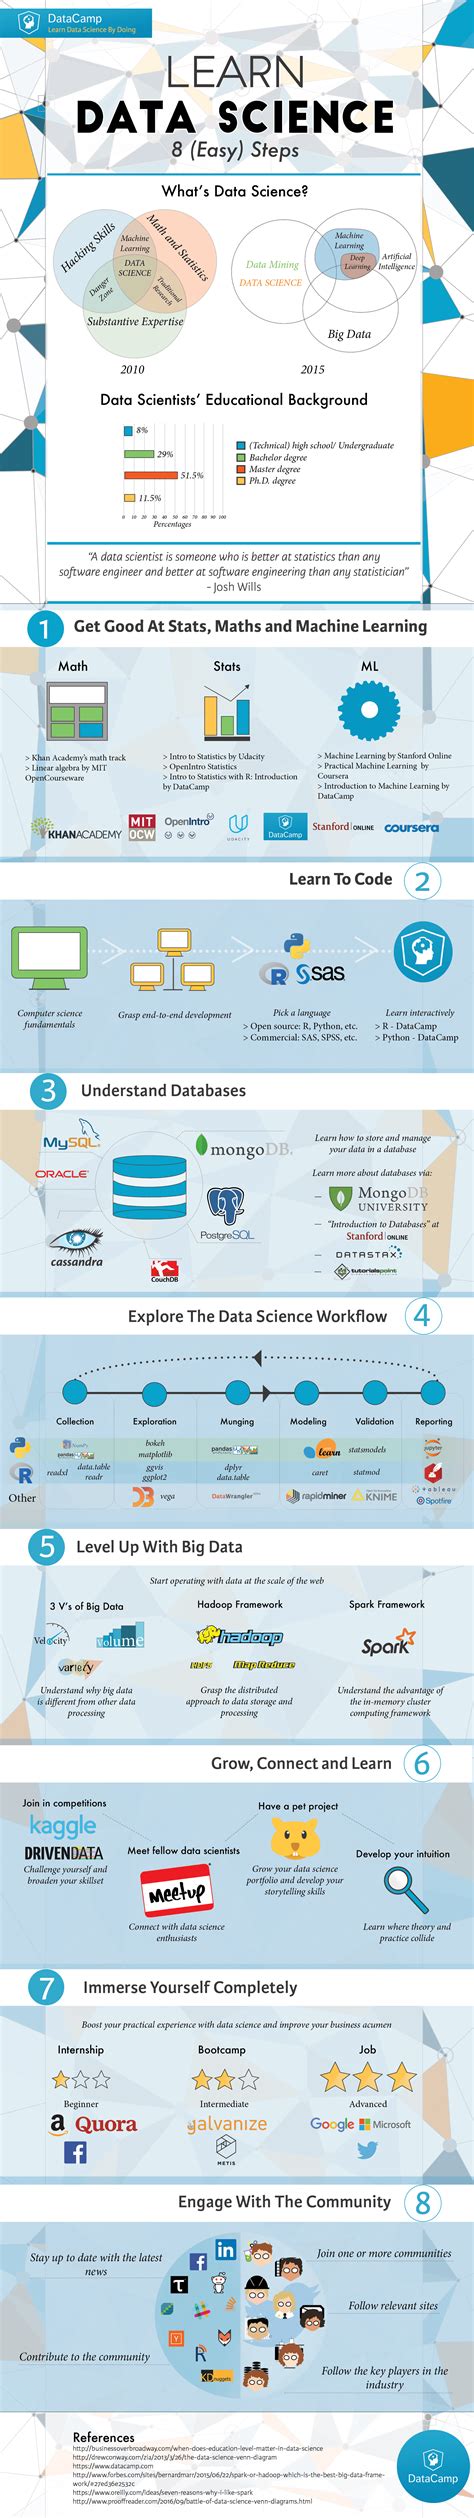 learn data science infographic datacamp